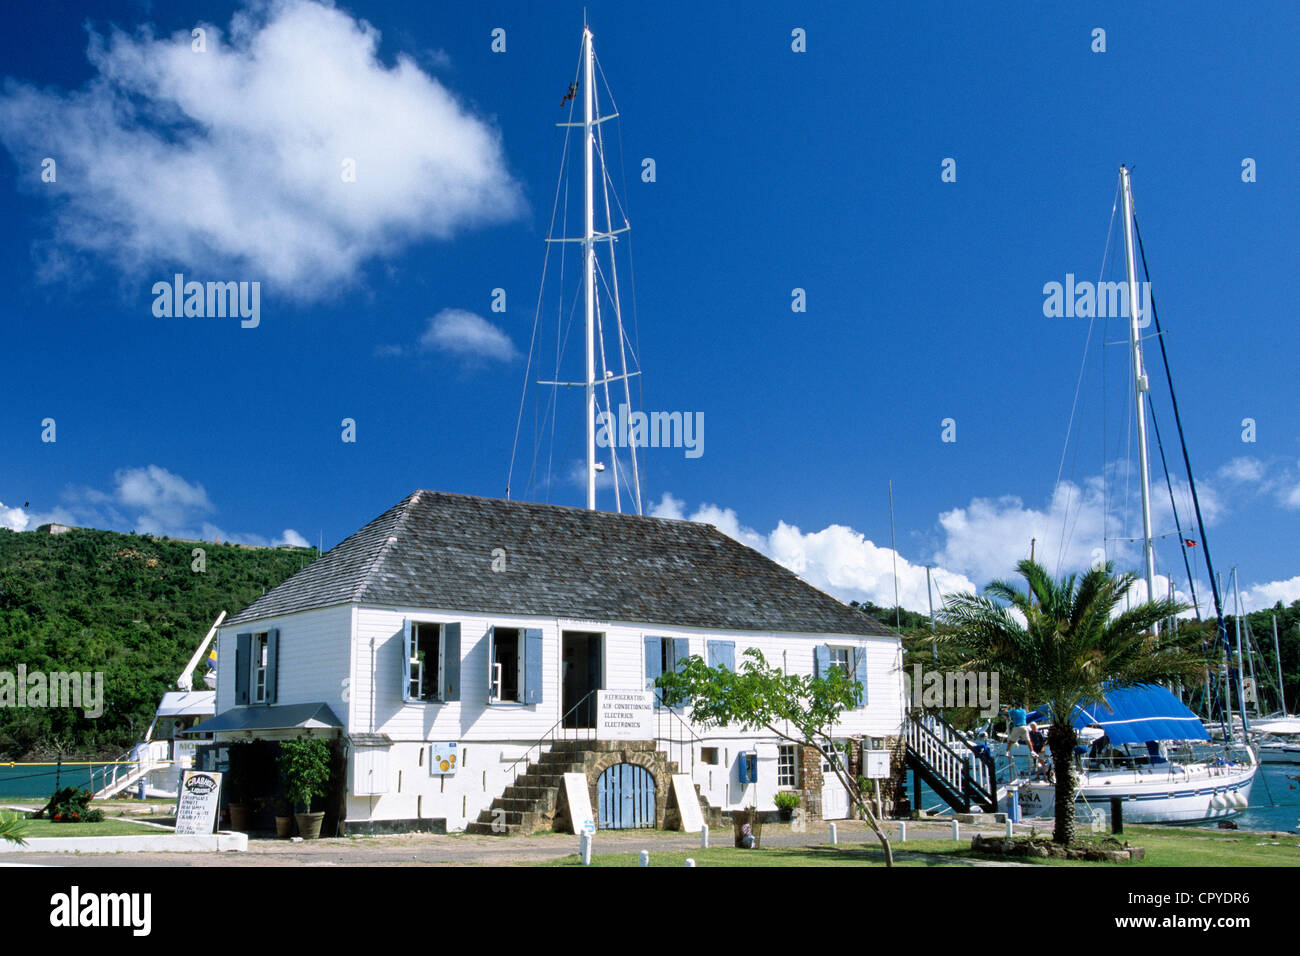 Antigua and Barbuda, Antigua Island, harbour master's office at English Harbour Stock Photo